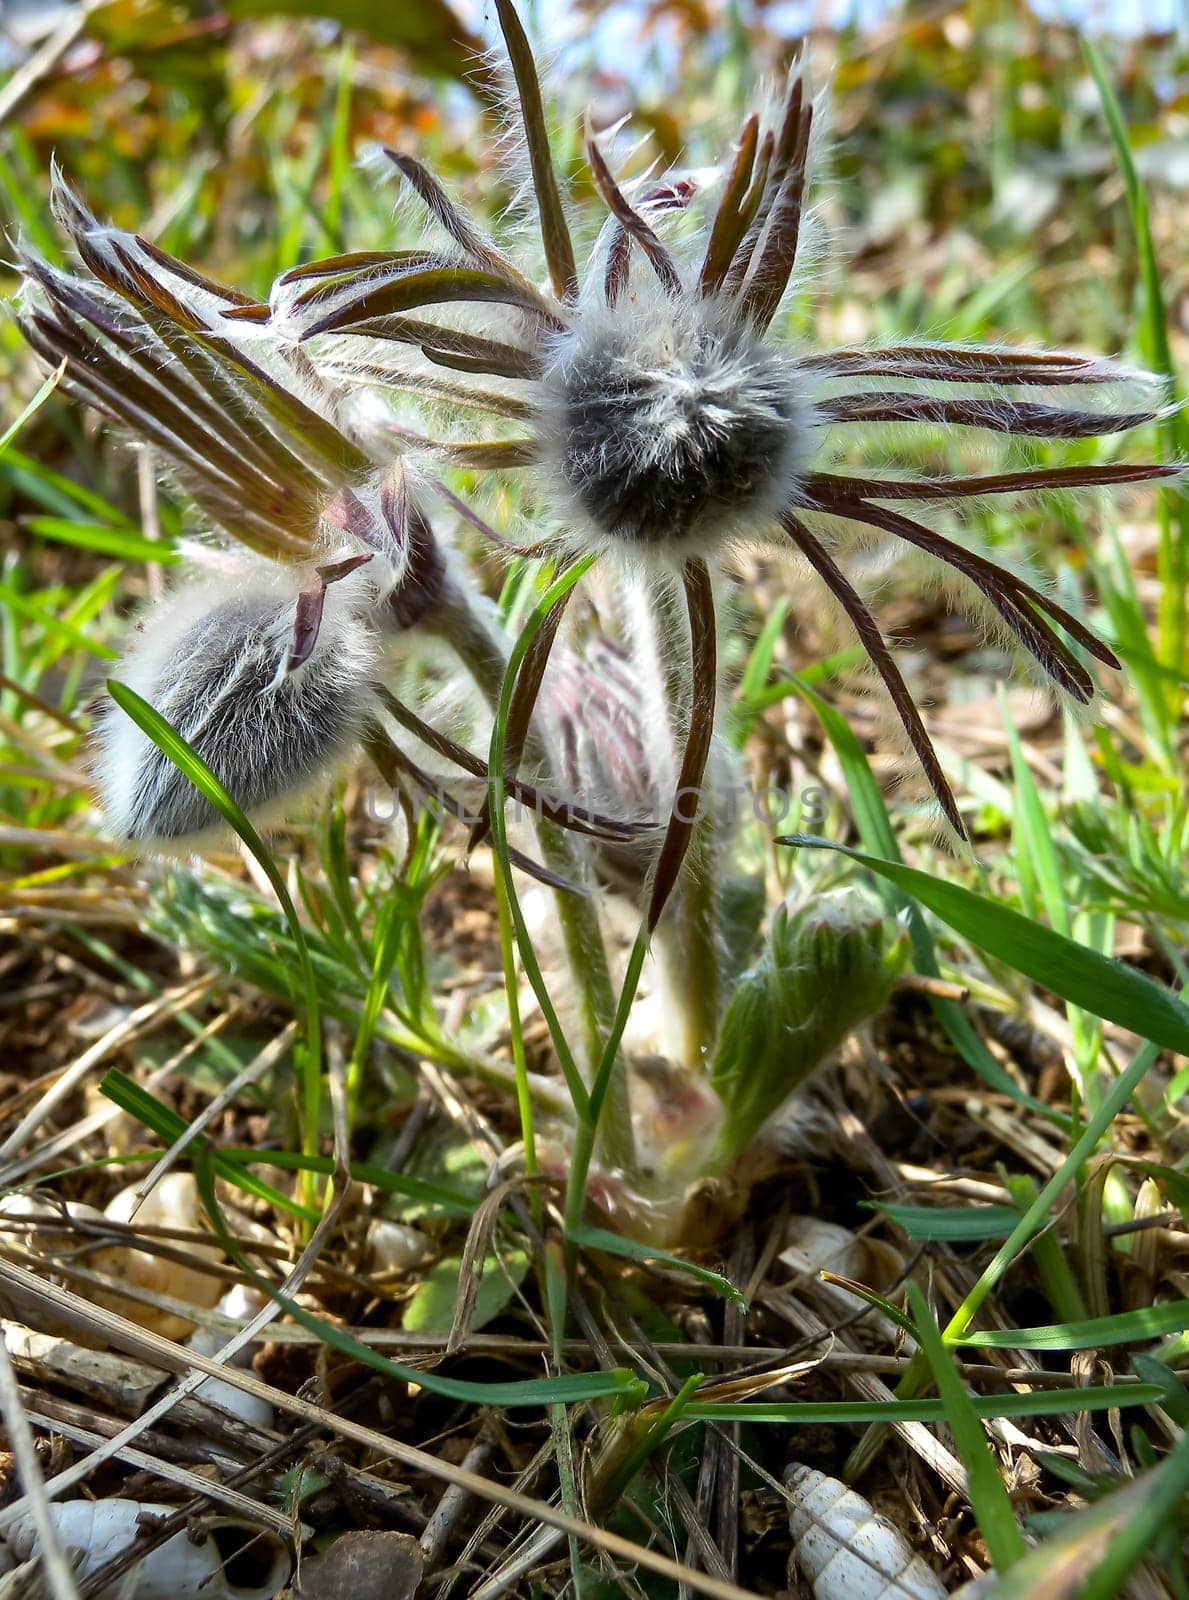 Eastern pasqueflower, cutleaf anemone (Pulsatilla patens) blooming in spring among the grass in the wild